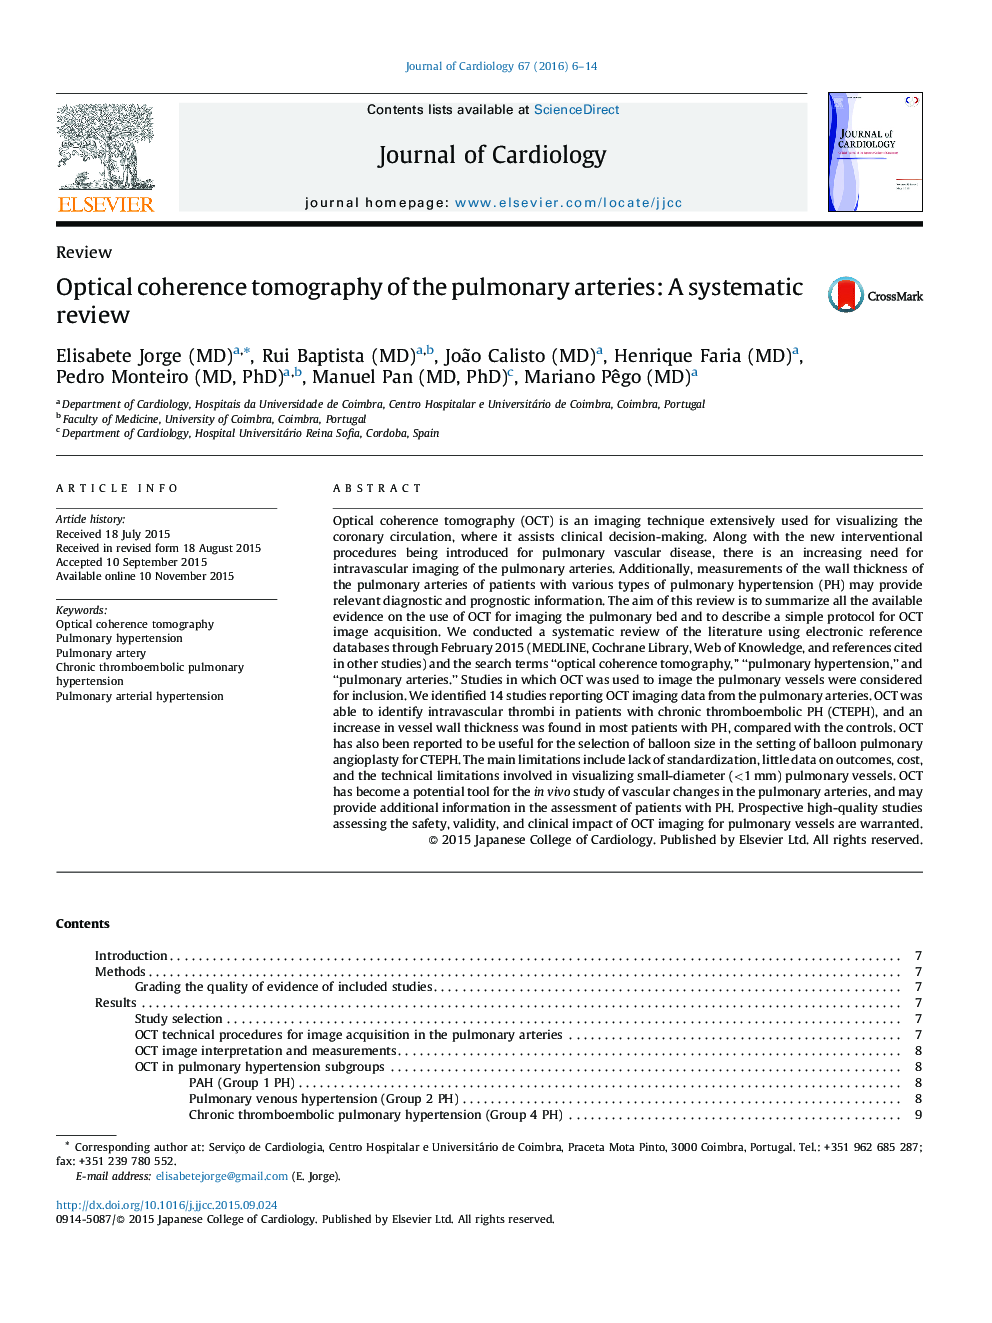 Optical coherence tomography of the pulmonary arteries: A systematic review